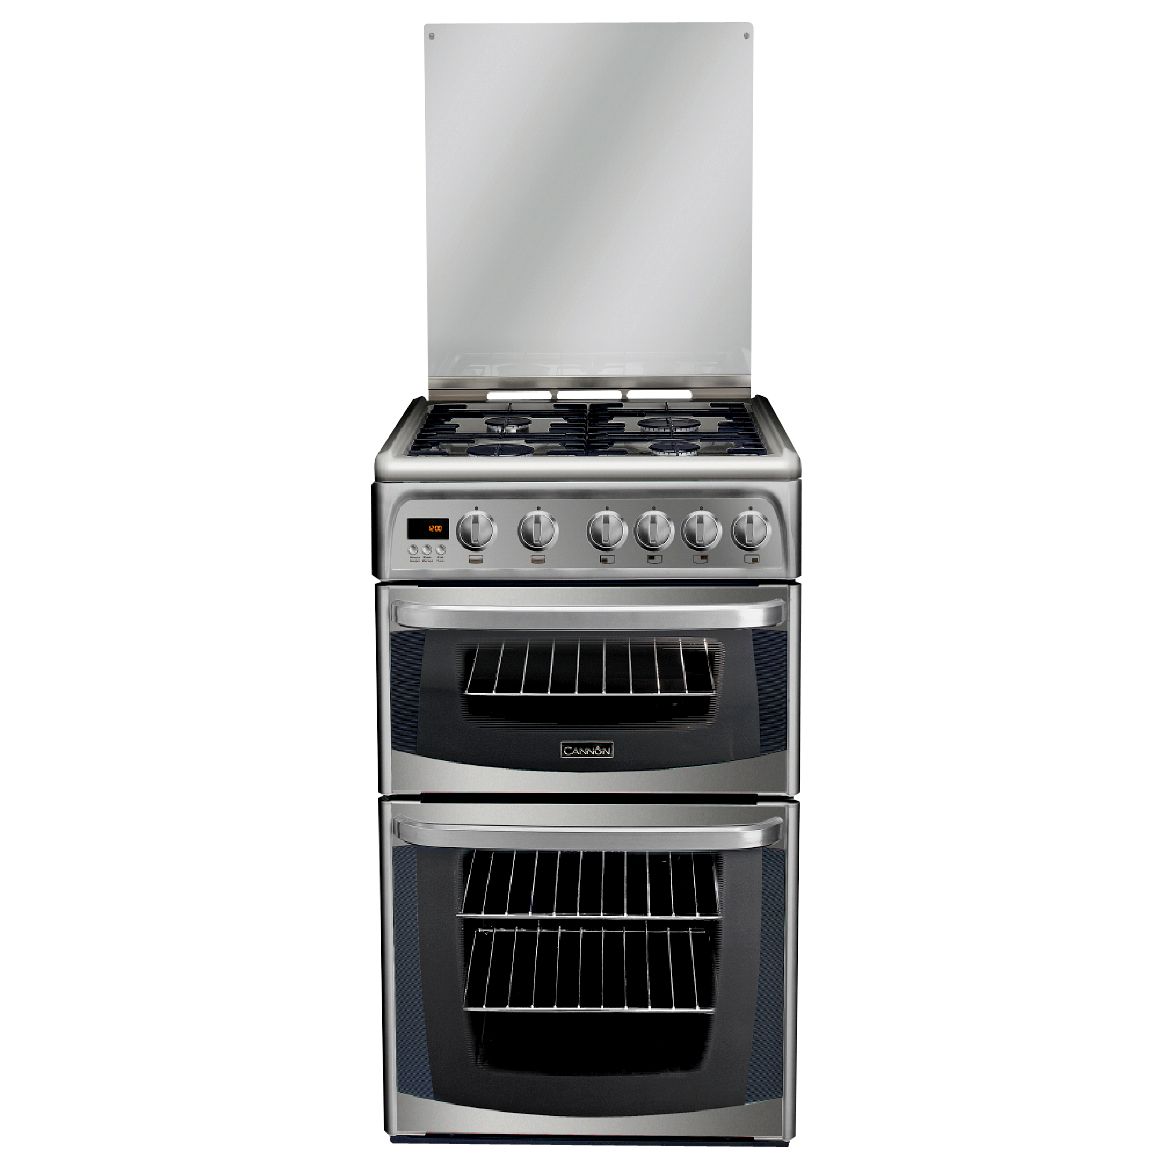 Cannon C50GCXF Coniston Gas Cooker, Stainless Steel at John Lewis